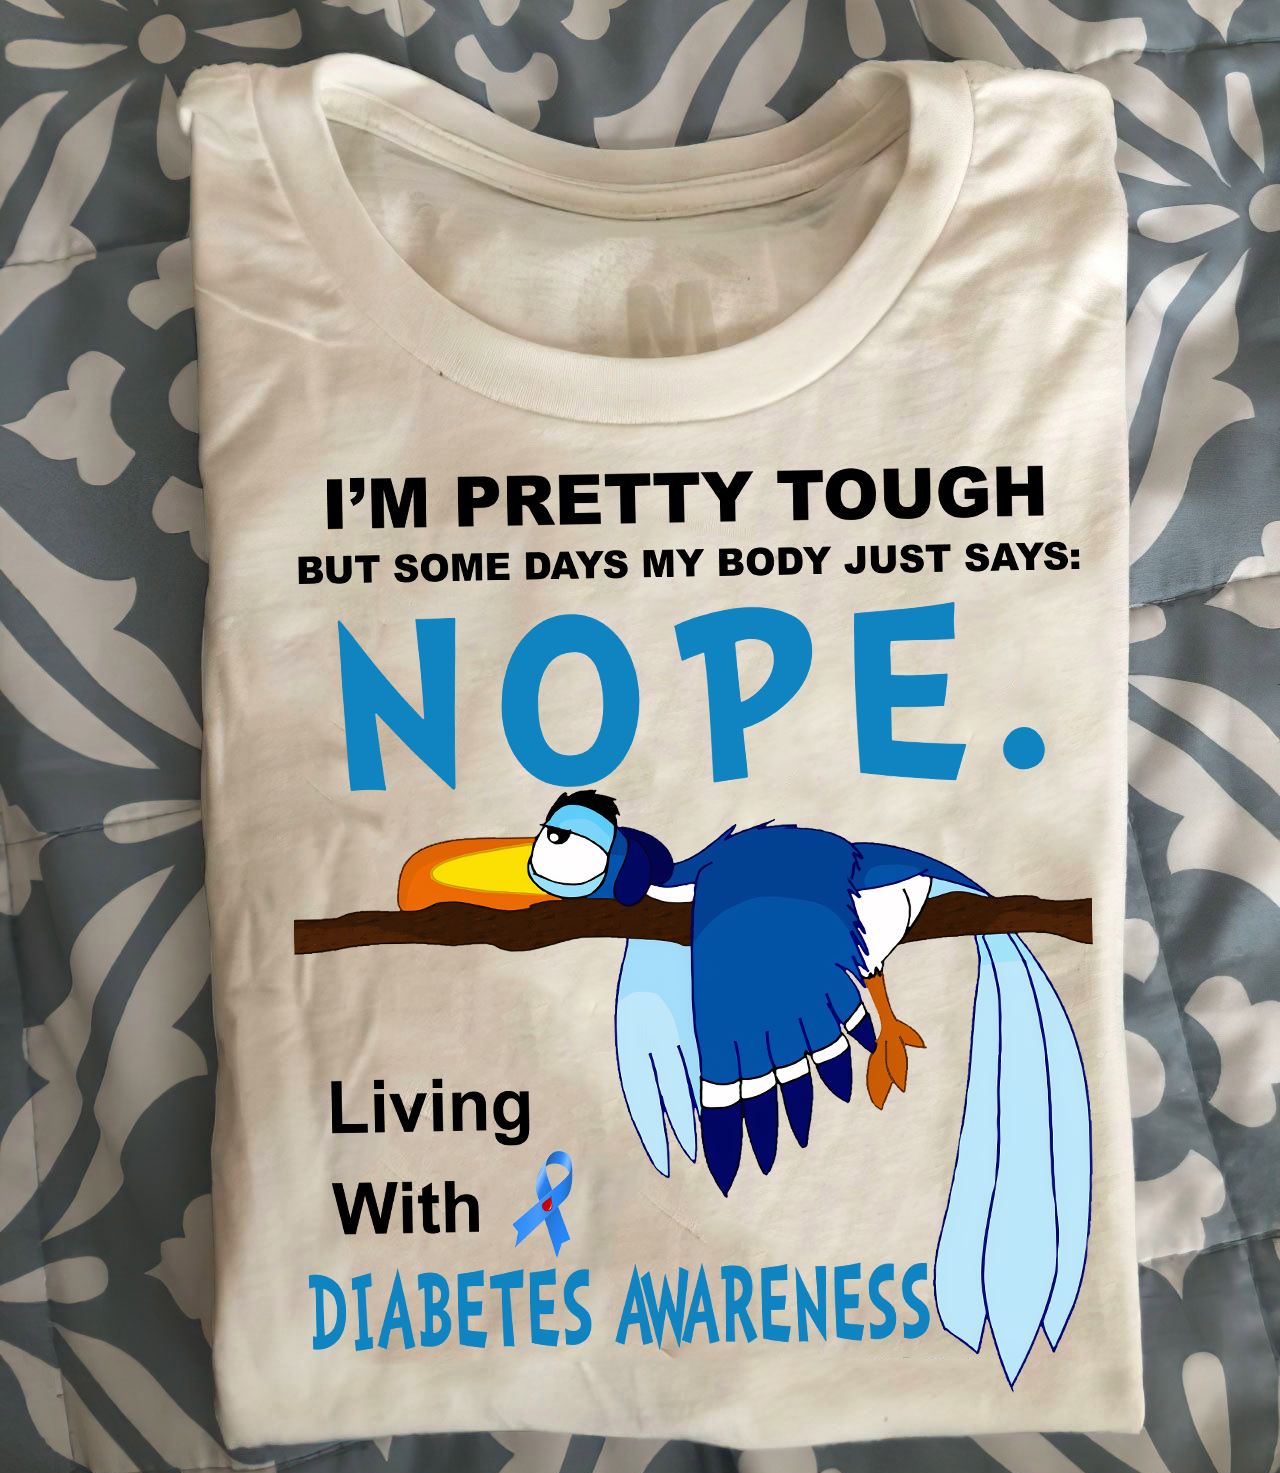 I'm pretty tough but some days my body just says nope living with Diabetes awareness